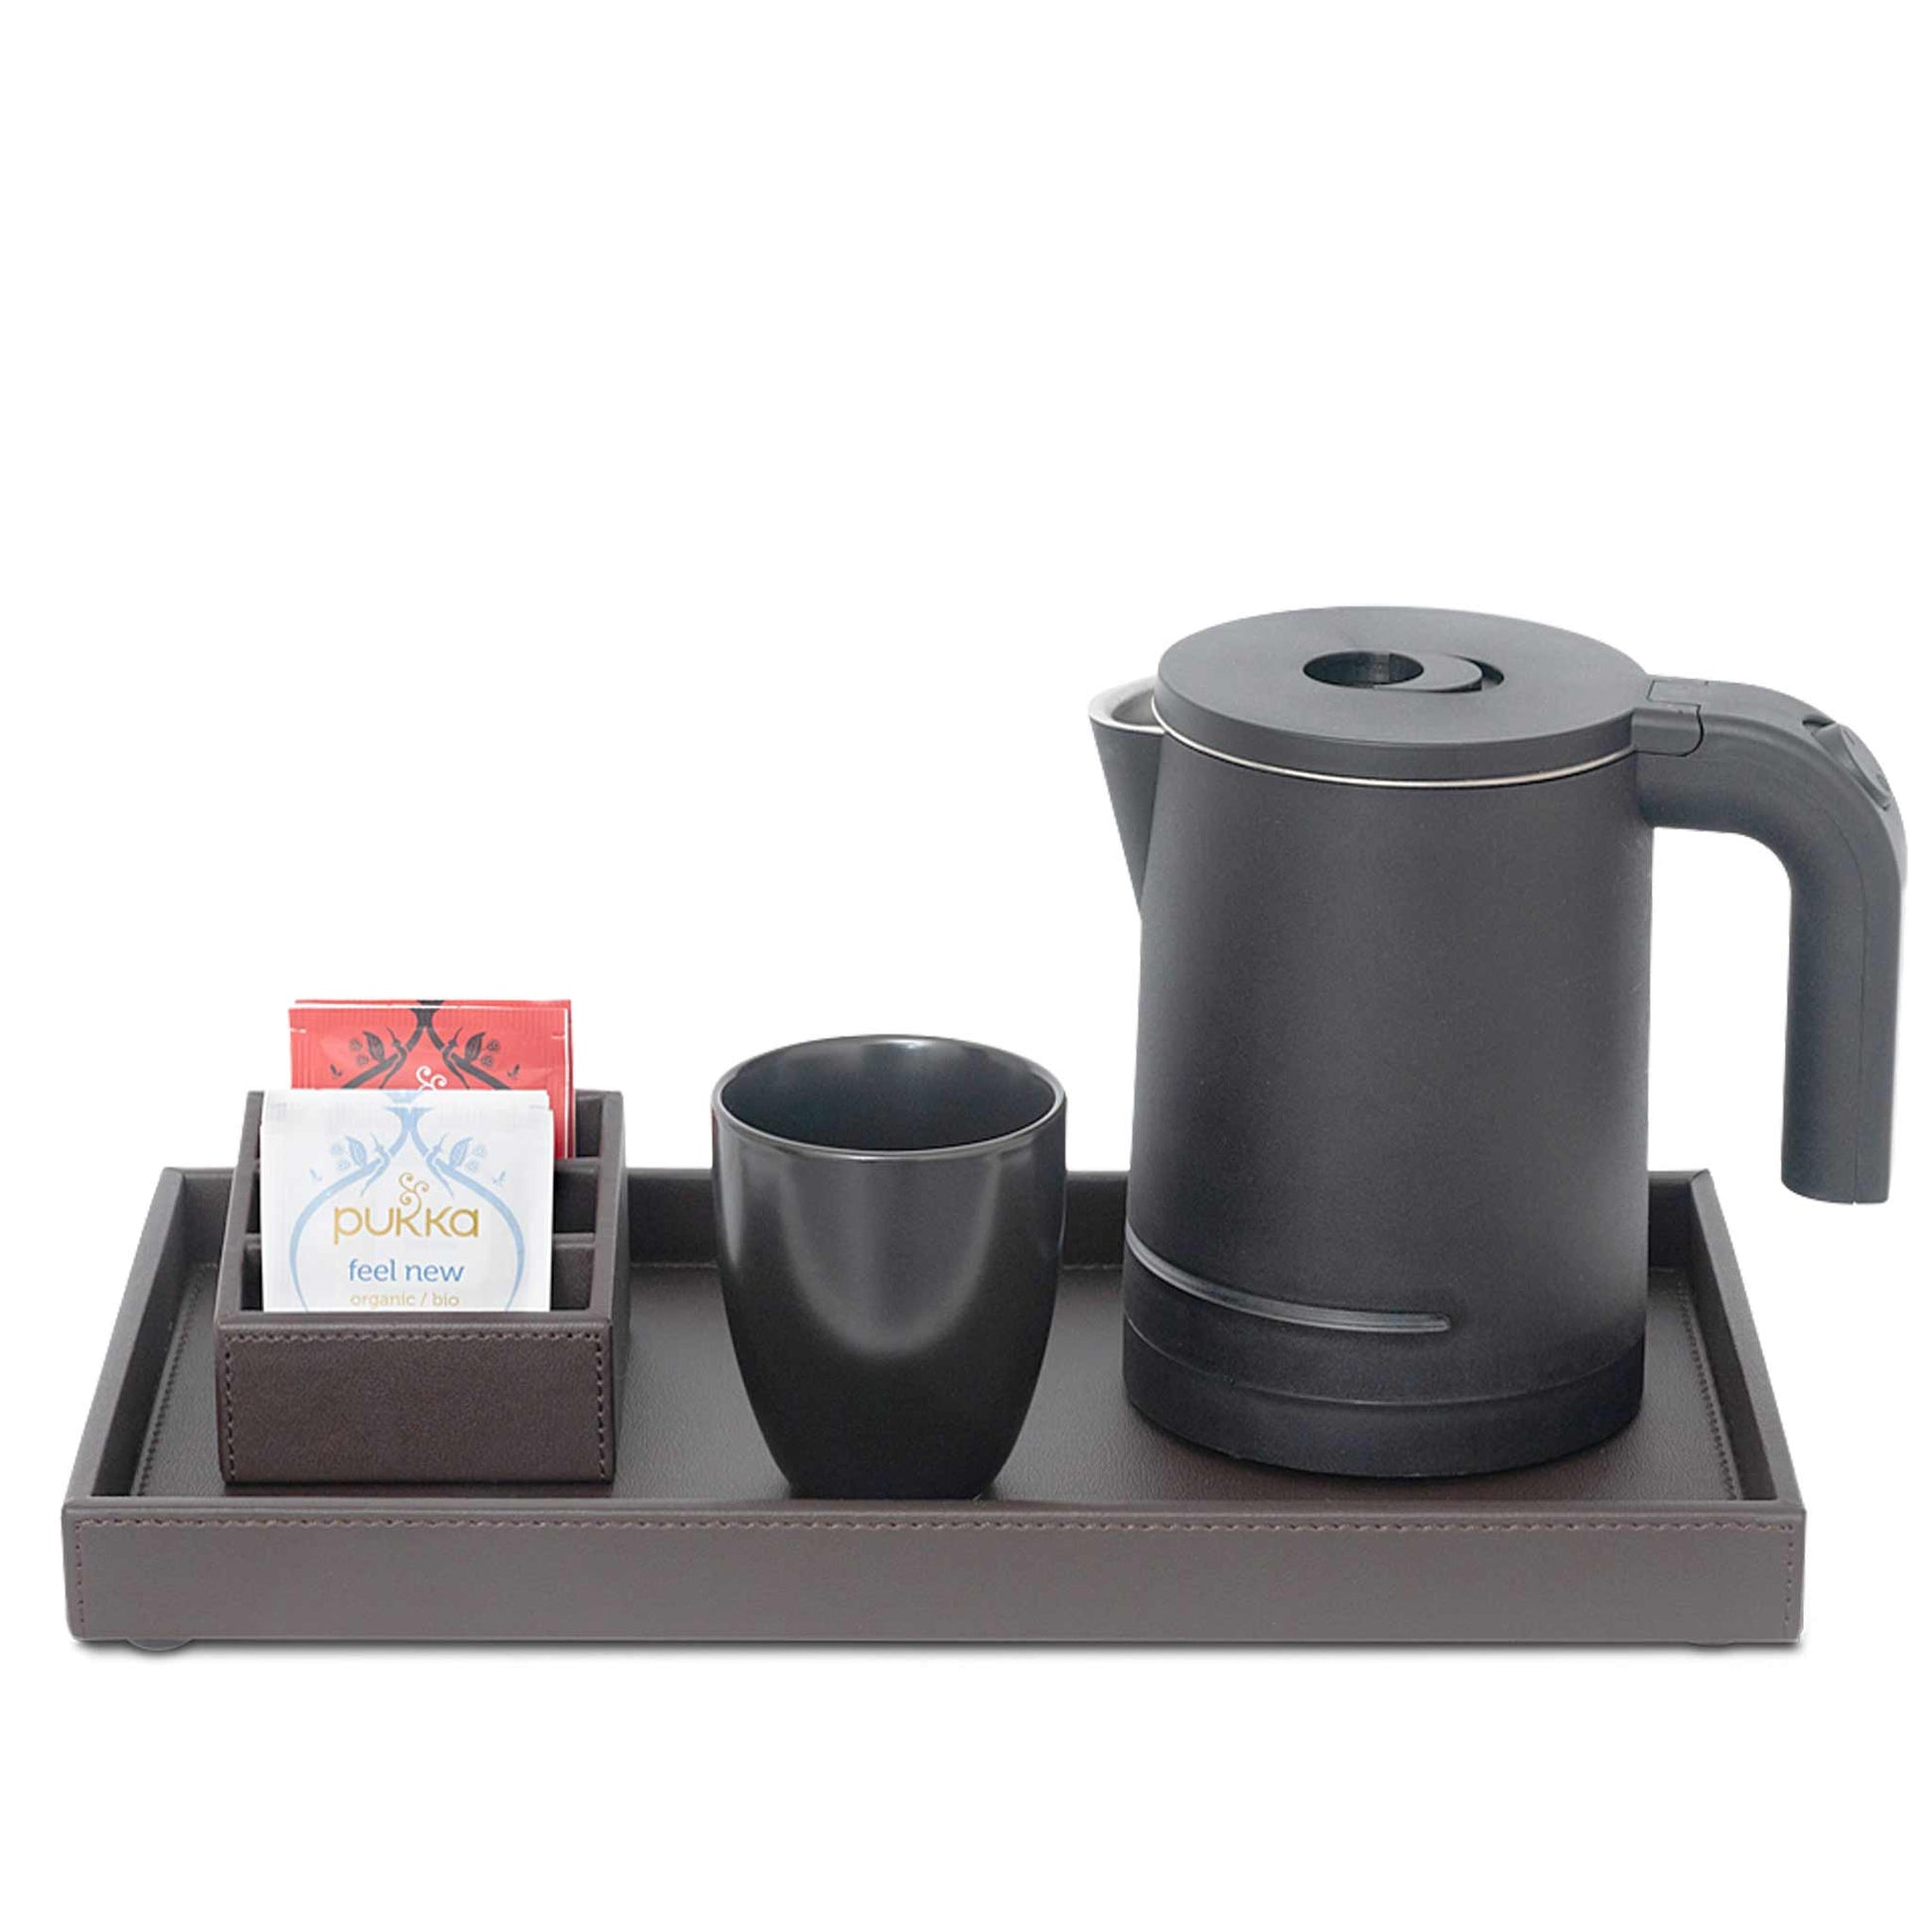 Hotel bedroom kettle tray with tea bag holder in brown leather